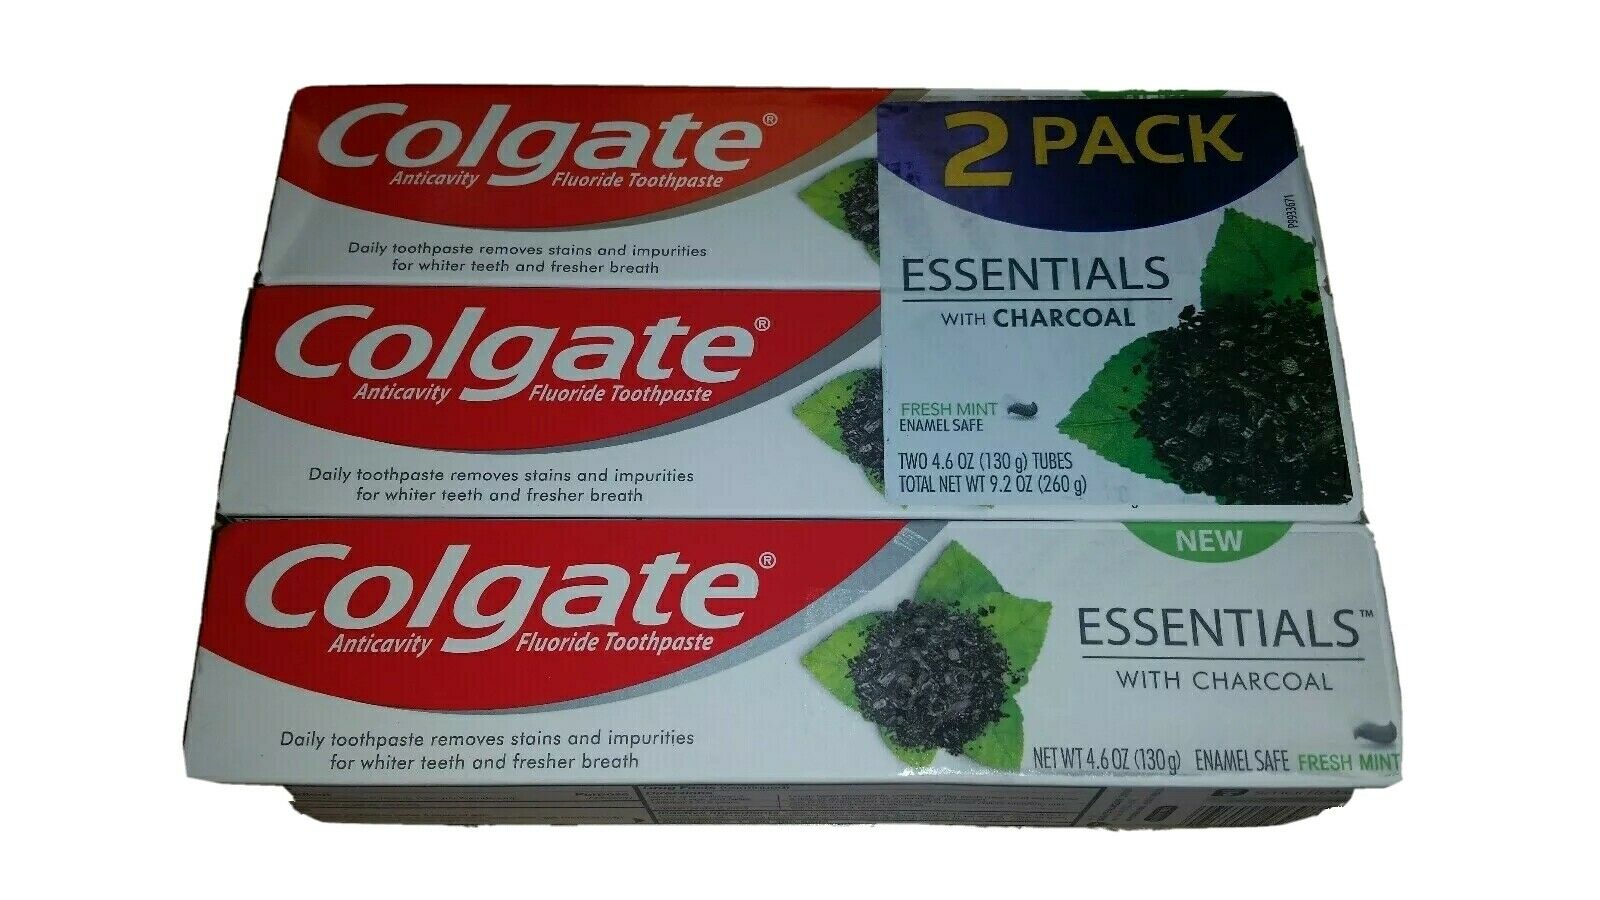 Colgate Essentials with Charcoal Toothpaste, 4.6oz Lot of 3!